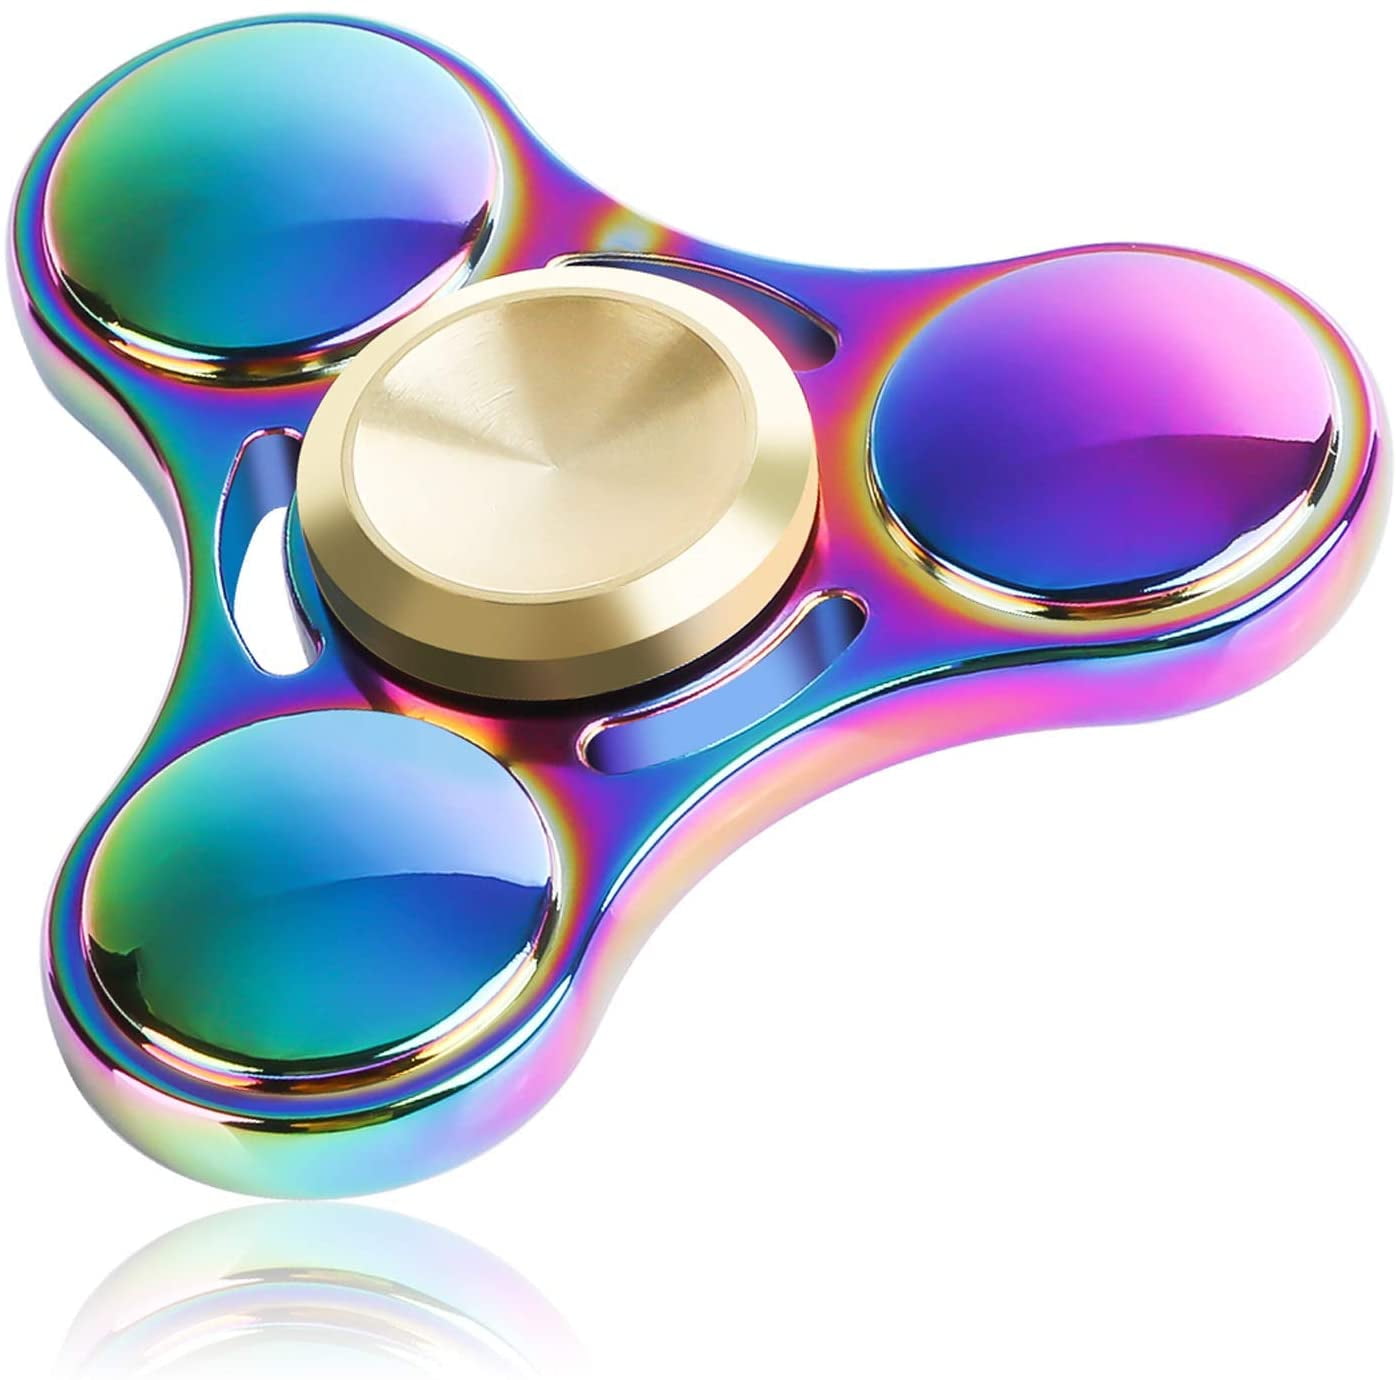 STYLE*2 Fidget Metal Hand Spinner High Speed Stress Anxiety Relief Toys Spins 2 